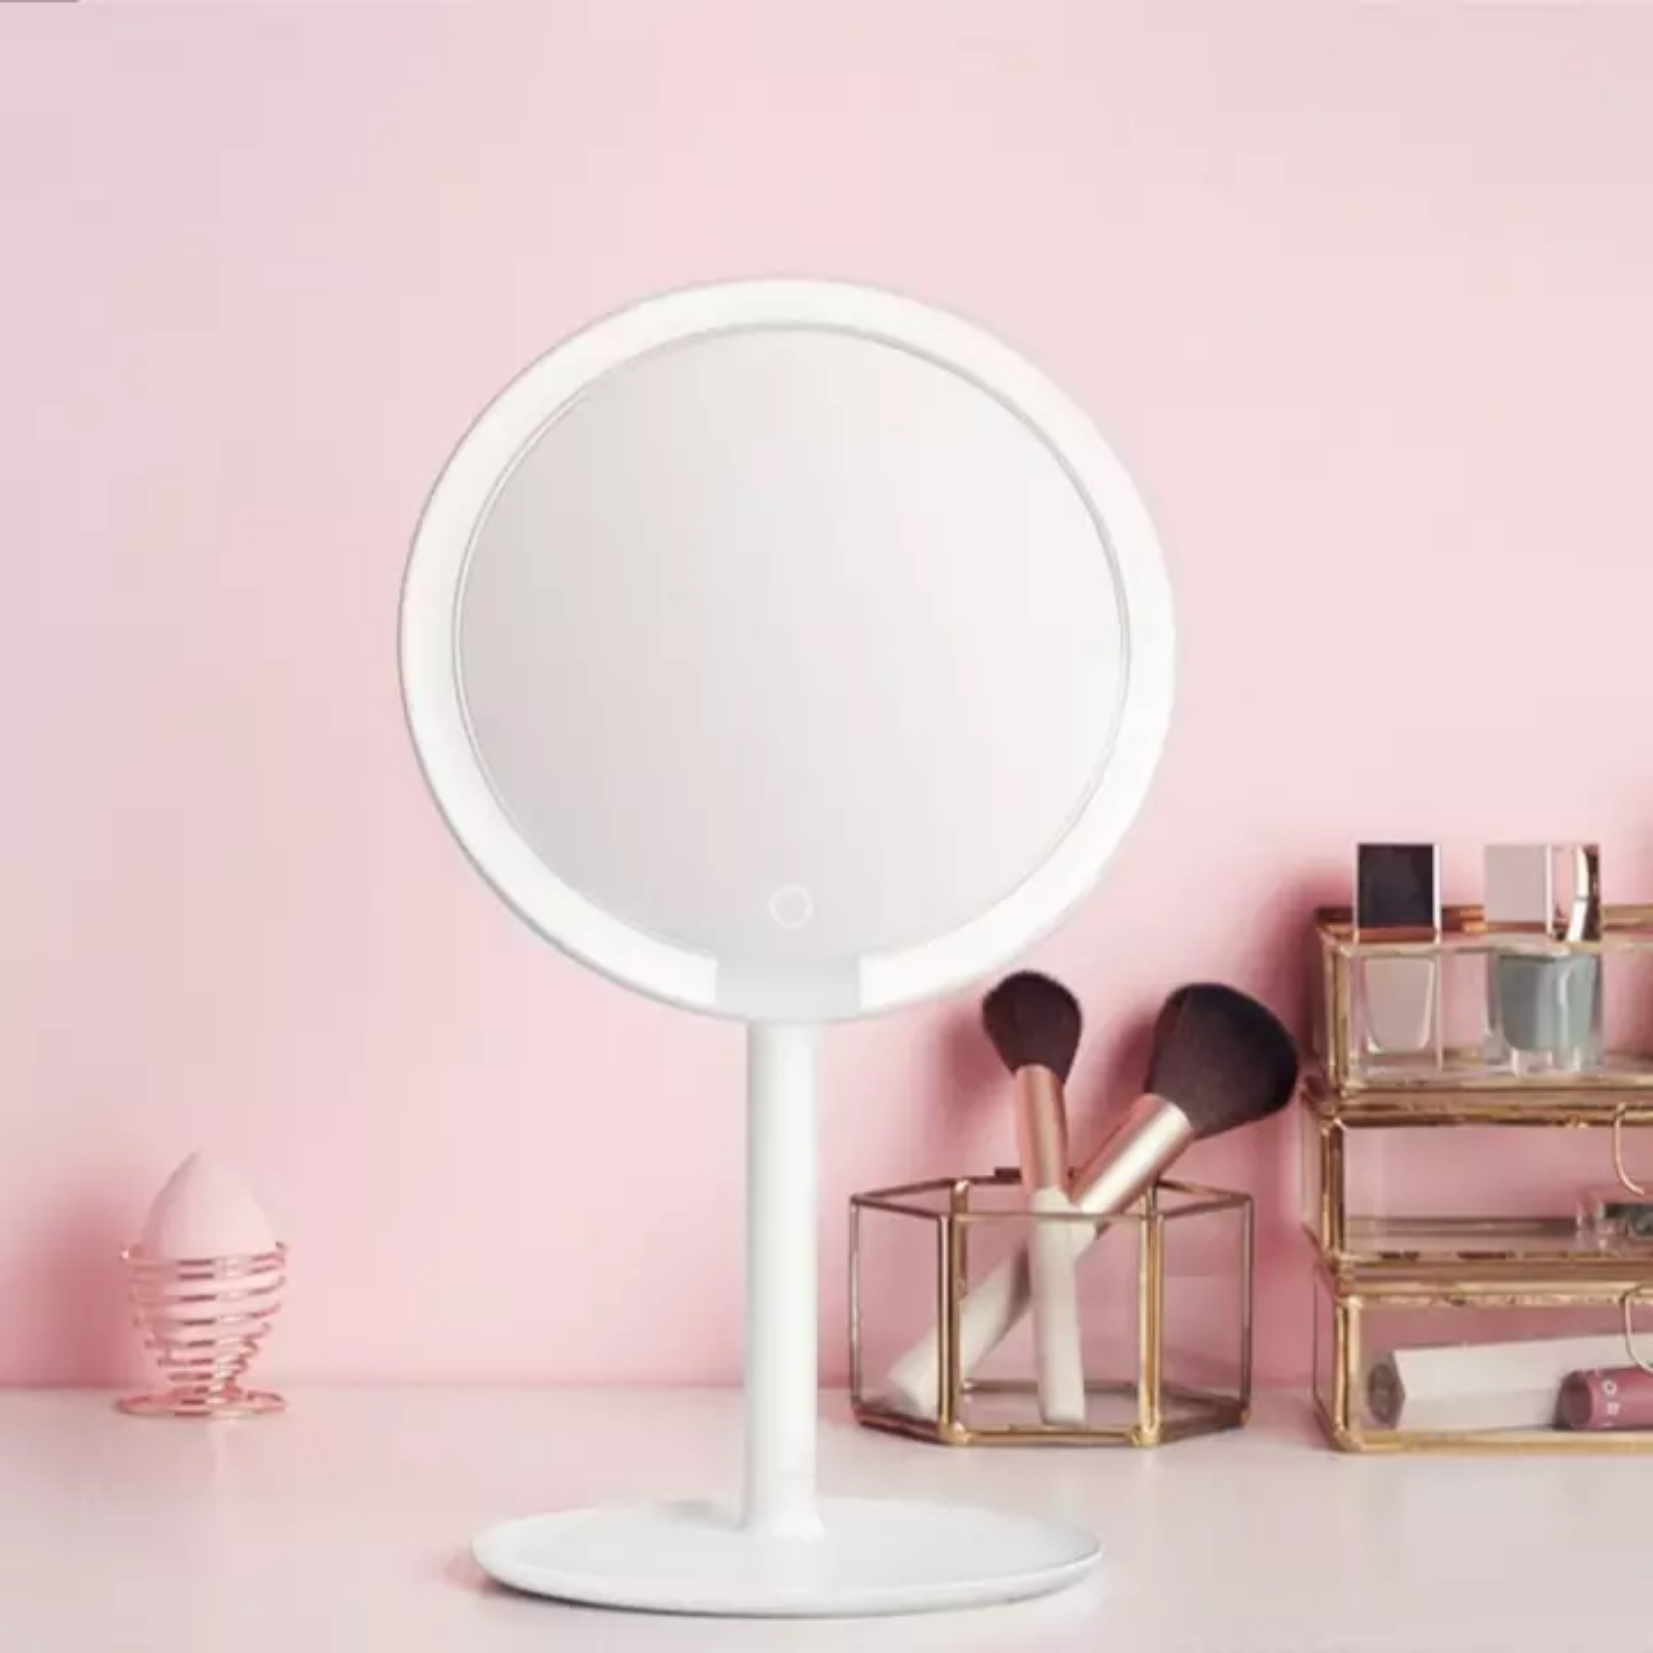 Xiaomi Mijia LED Lighted Makeup Mirror - Three Adjustable Brightness 0 - 45 Adjustable Angle Rechargeable Charging